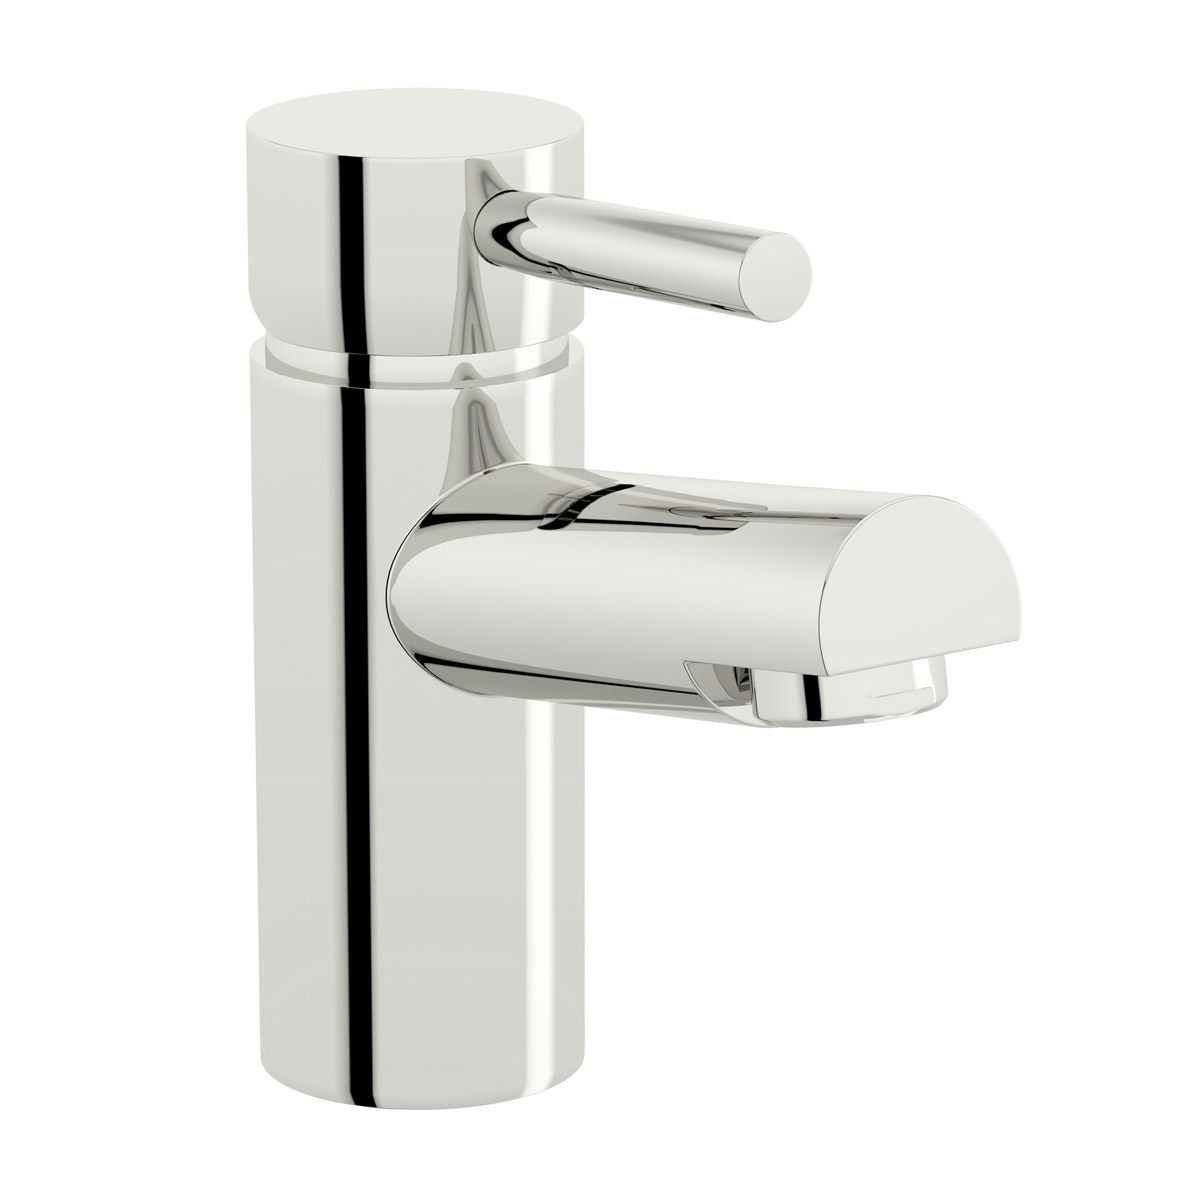 Orchard Eden cloakroom basin mixer tap with slotted waste